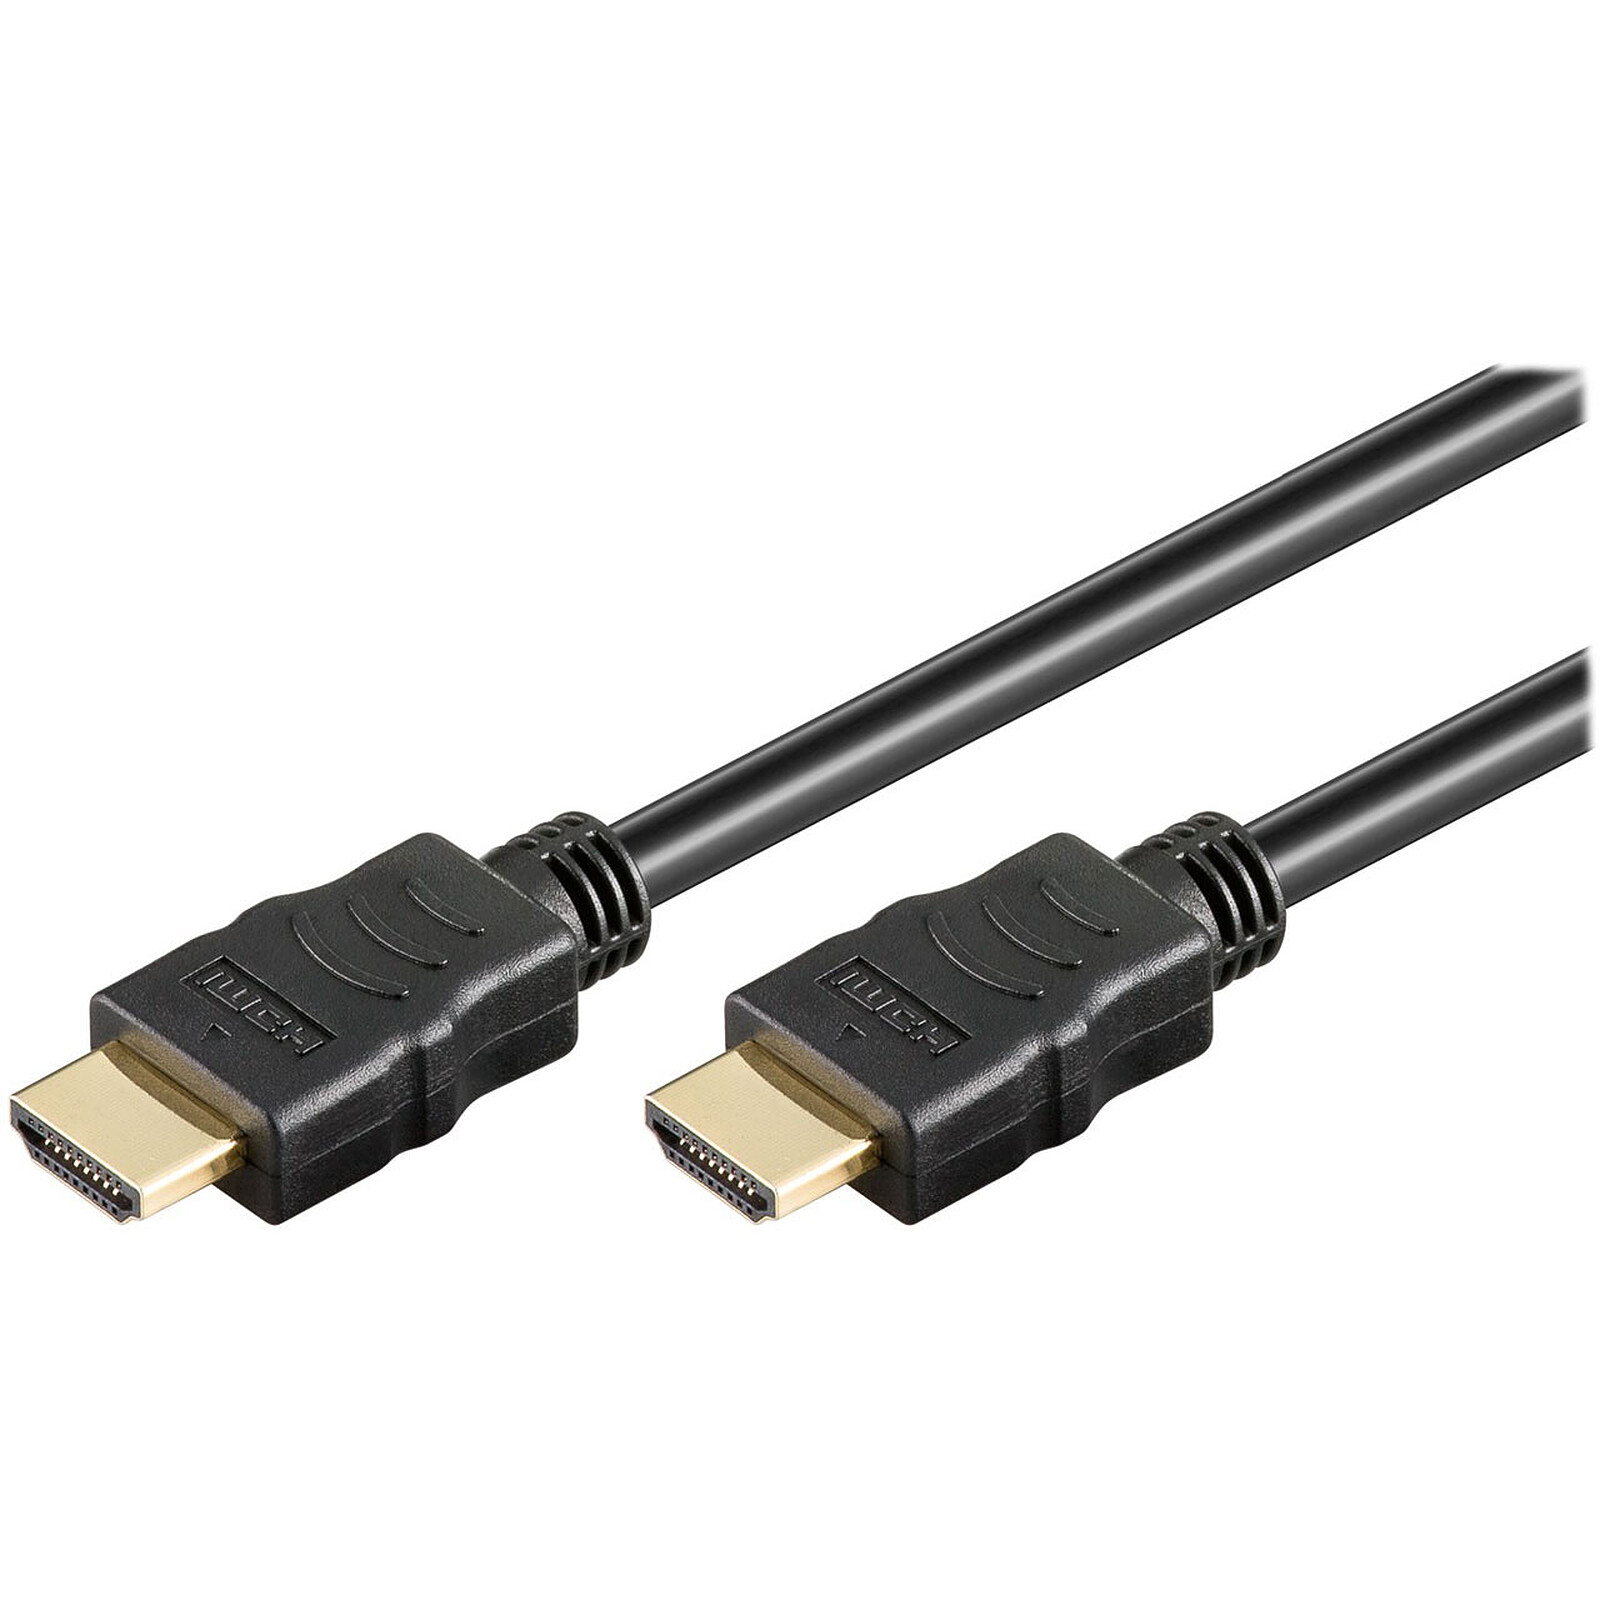 Goobay High Speed HDMI Cable with Ethernet (7.5 m) - HDMI - Garantie 3 ans  LDLC